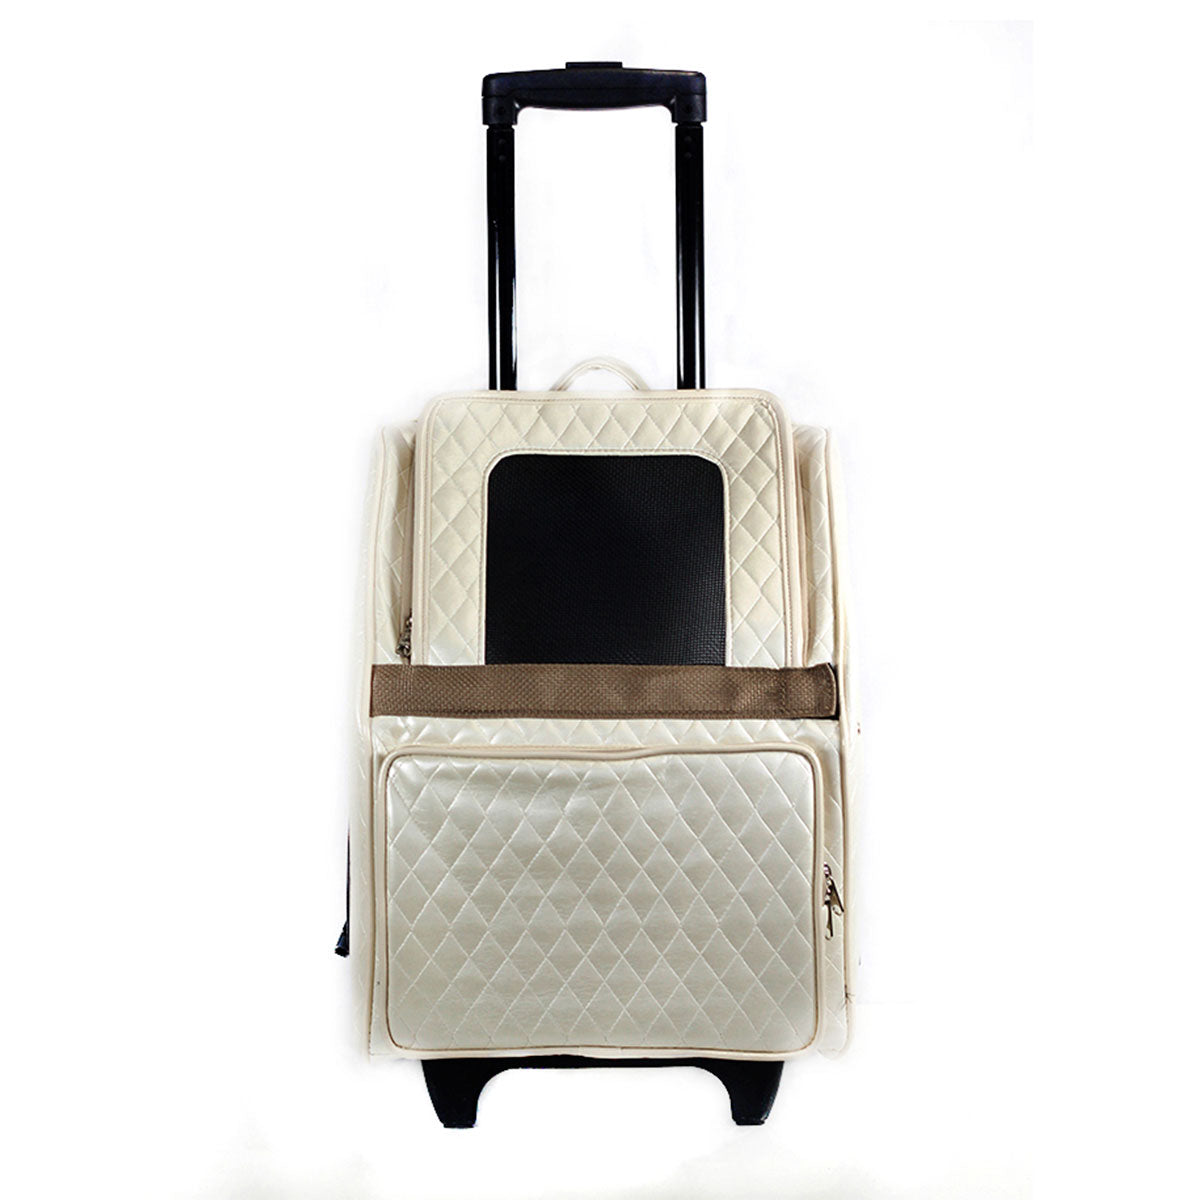 Rio Carrier Bag on Wheels - Quilted Ivory Luxe | Pawlicious & Company